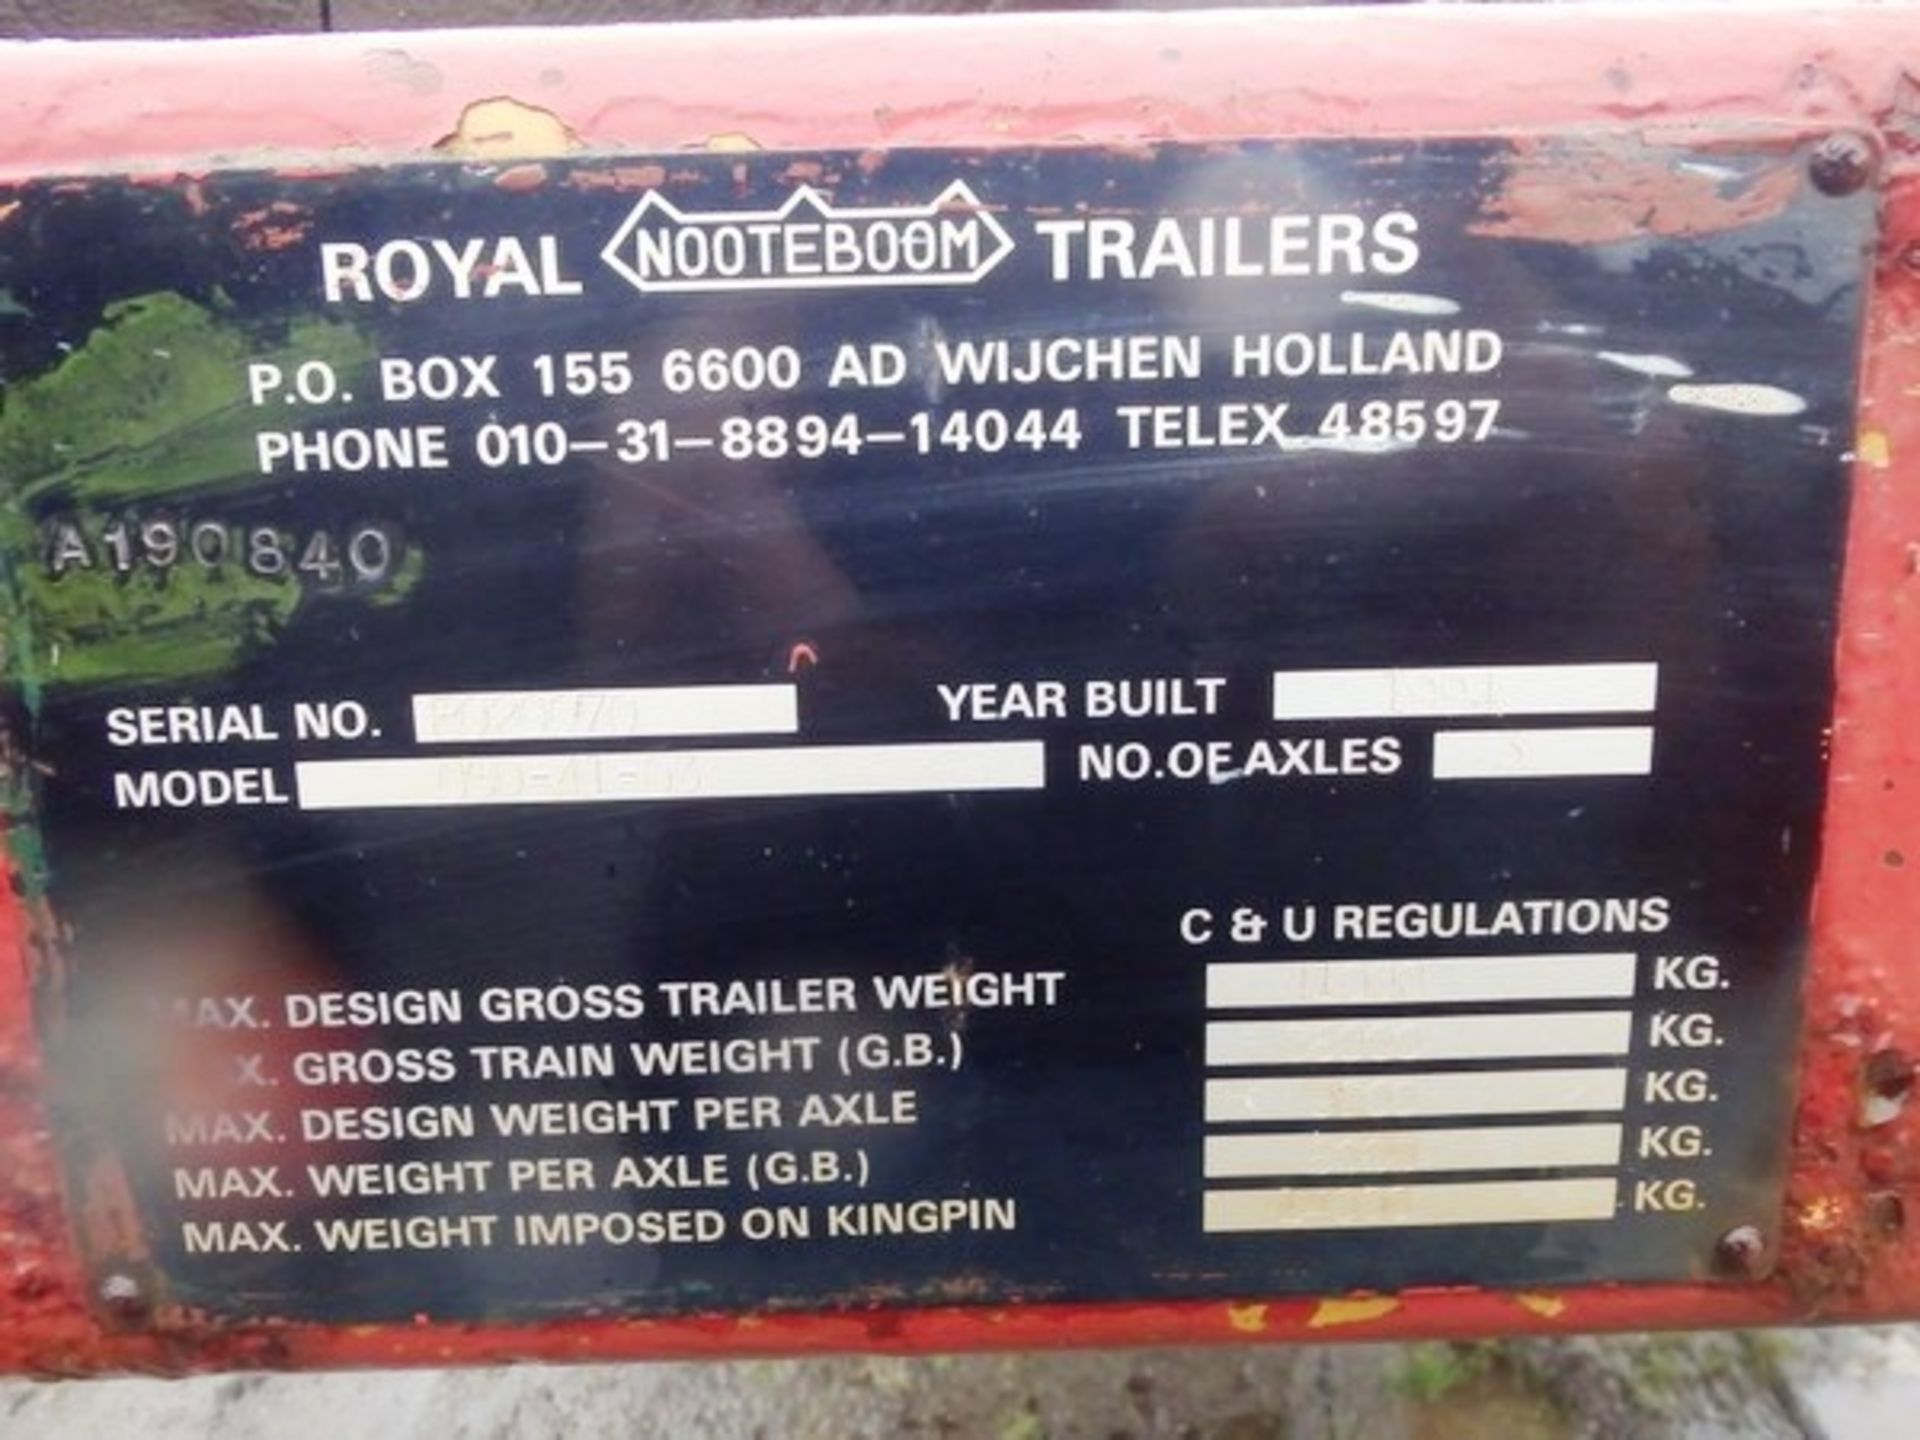 1999 NOOTE BOOM STEP FRAME LOW LOADER, MODEL OSD-41-03, 3 AXLES, GROSS TRAILER WEIGHT 41000KG, GROSS - Image 3 of 11